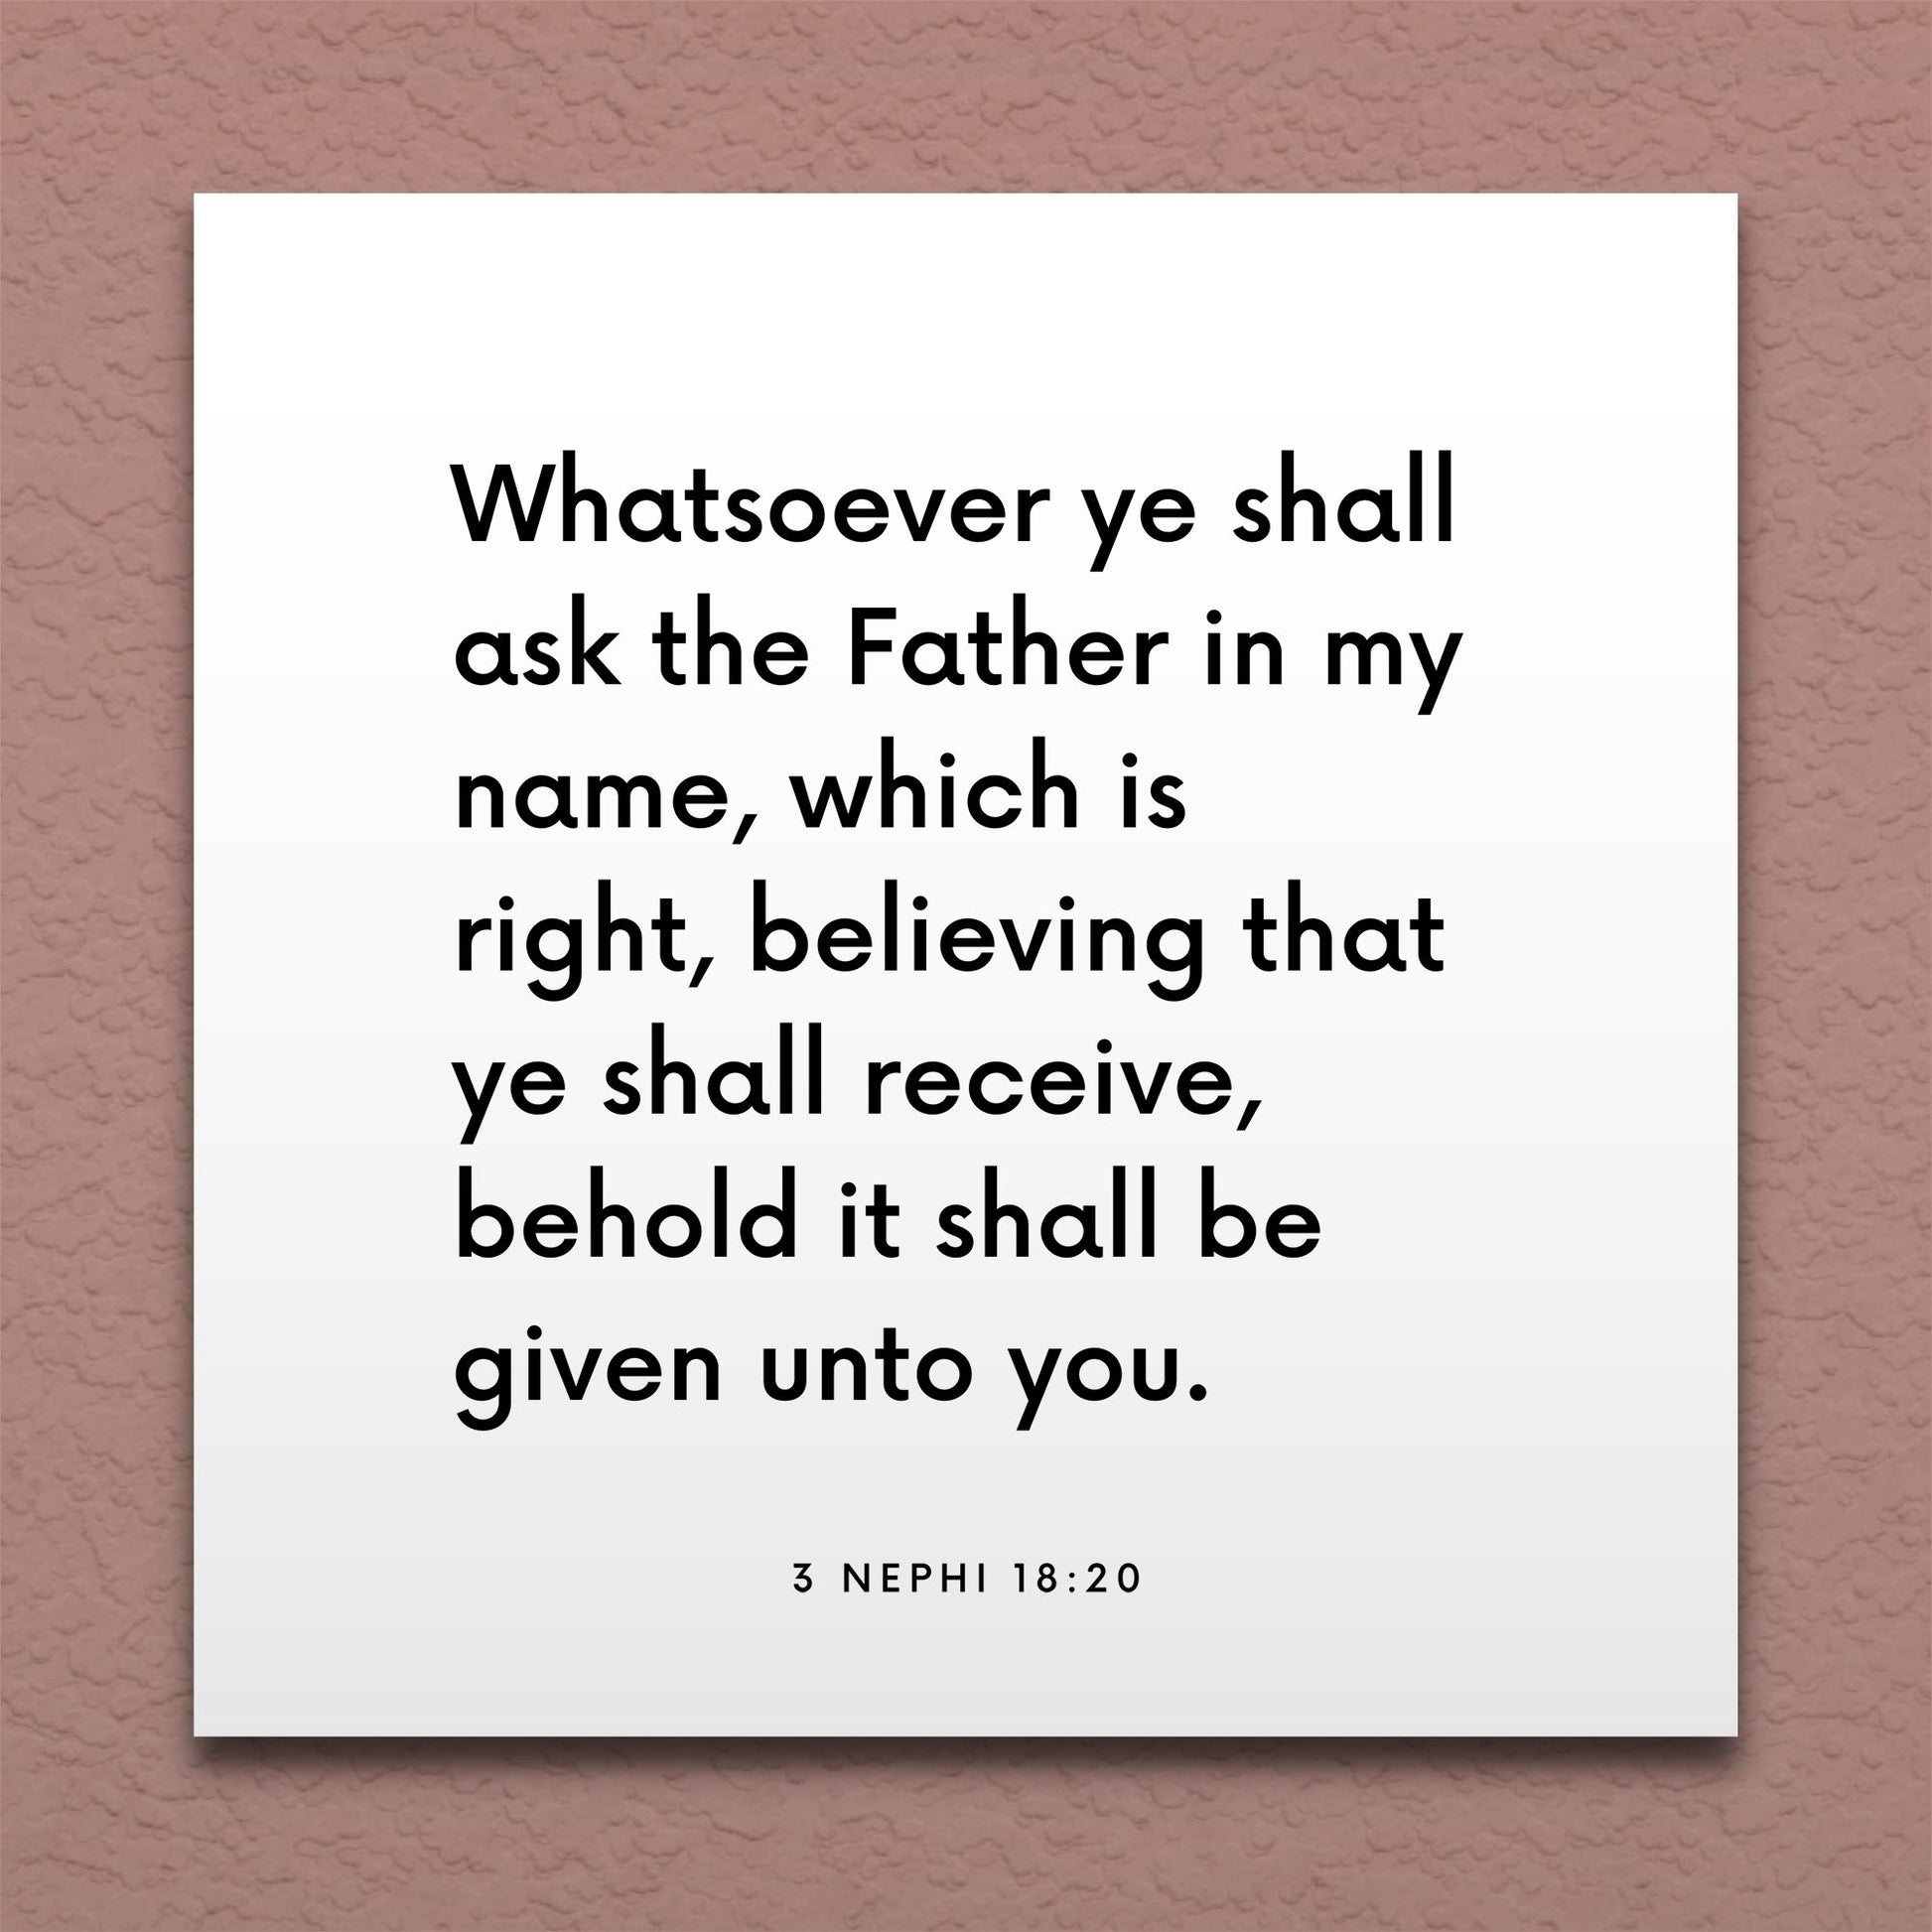 Wall-mounted scripture tile for 3 Nephi 18:20 - "Whatsoever ye shall ask the Father in my name"